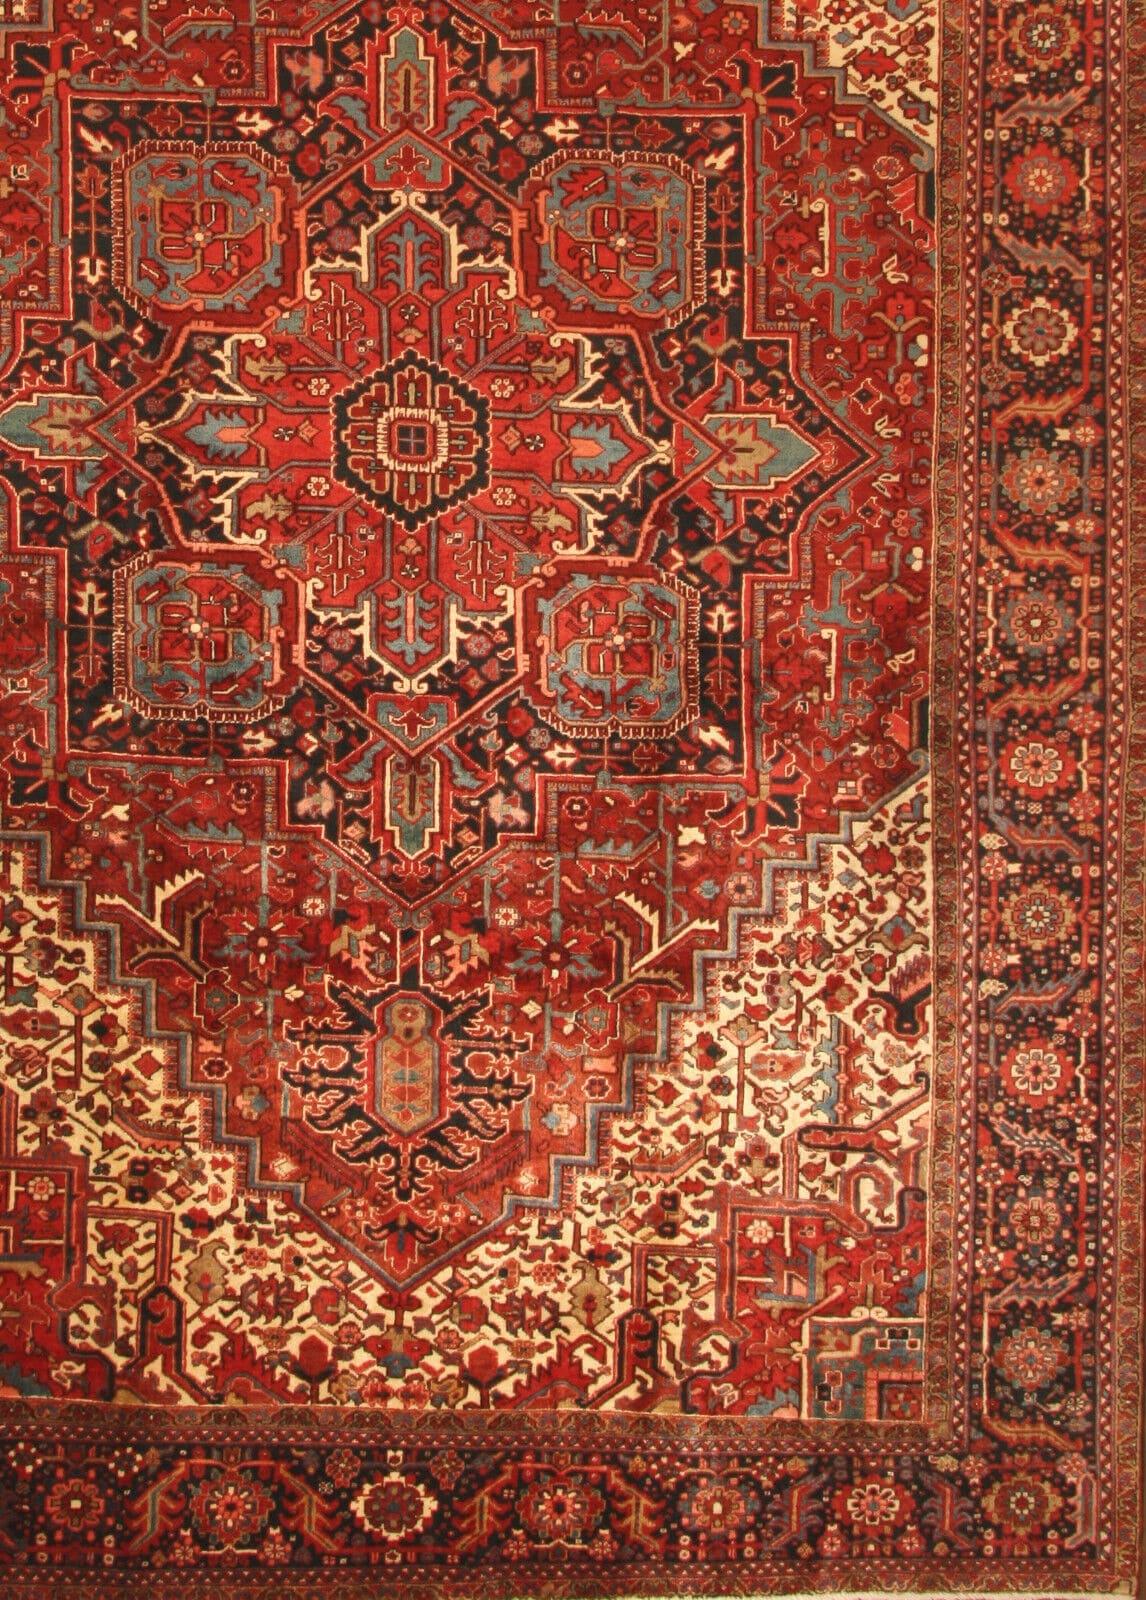 Mid-20th Century Handmade Vintage Persian Style Heriz Rug 10.6' x 15.4', 1940s - 1T07 For Sale